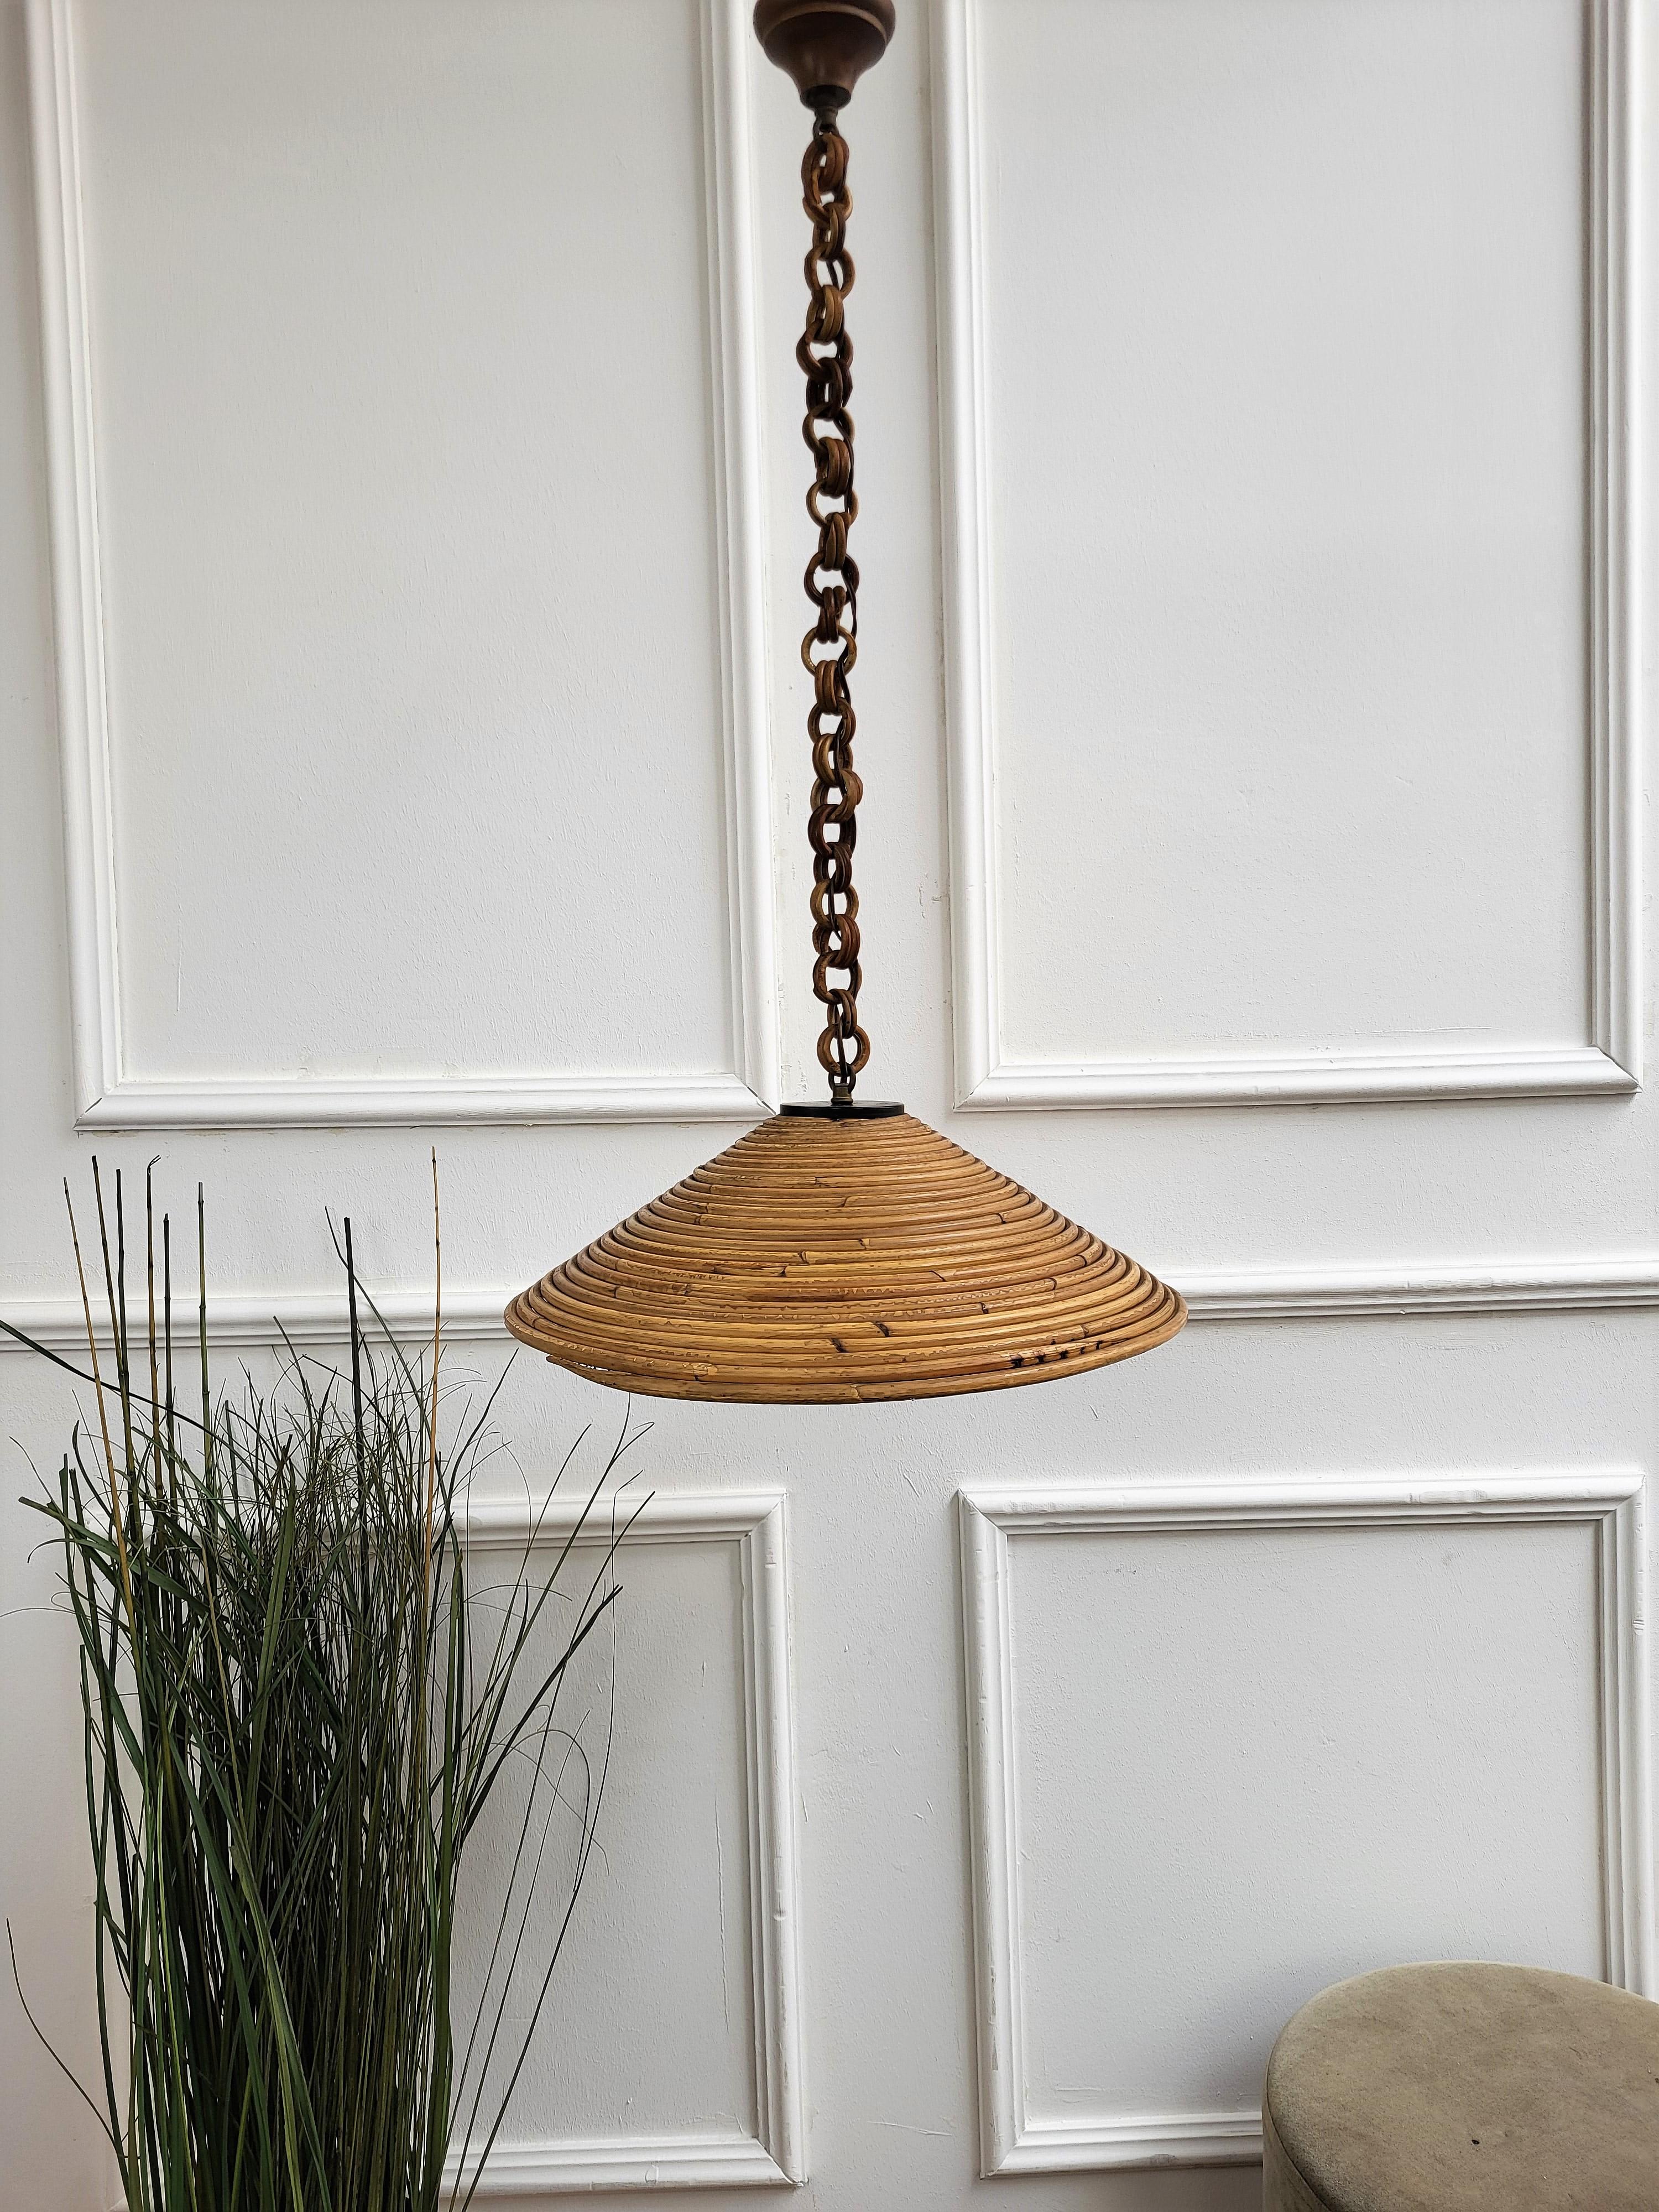 Eyecatching Italian 1960s handcrafted rattan pendant light with circular design. This suspension lamp has a bell shaped lampshade hanging from a rattan bamboo chain topped by a wooden carved bun. The length of the chain can be shortened removing